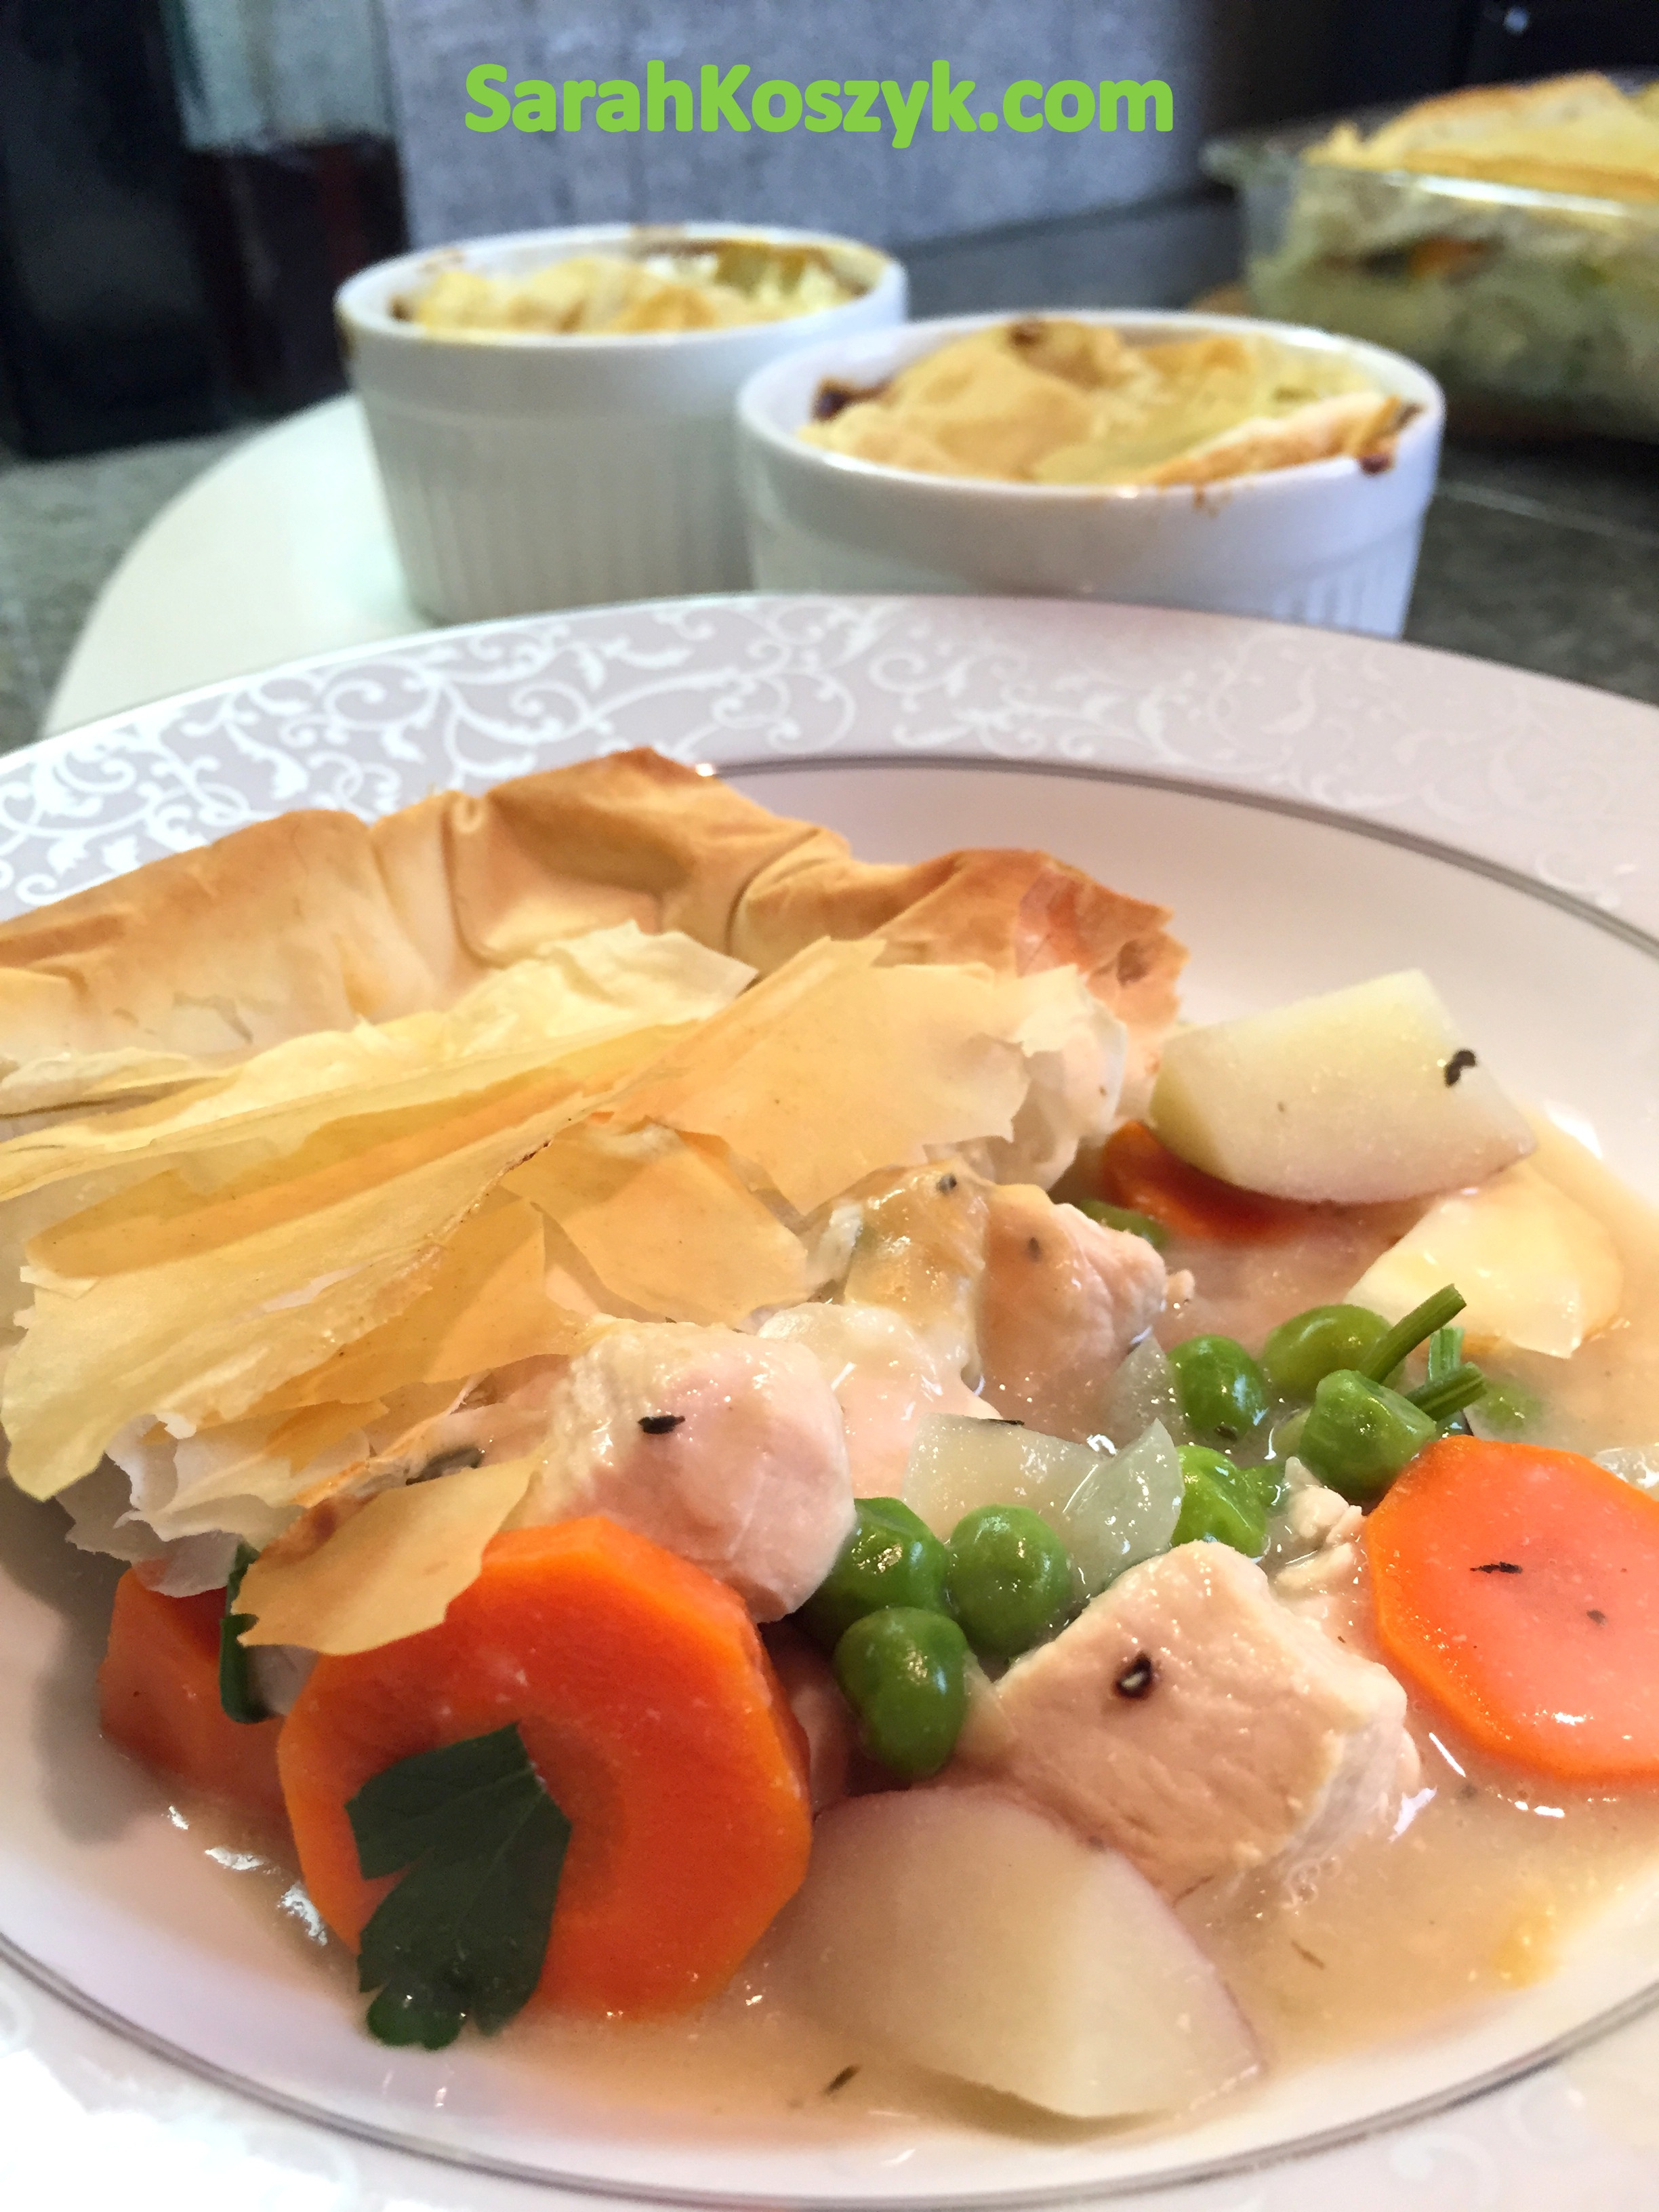 Low Calorie Chicken Pot Pie Recipes
 Healthy and Low Fat Chicken Pot Pie Sarah Koszyk Family